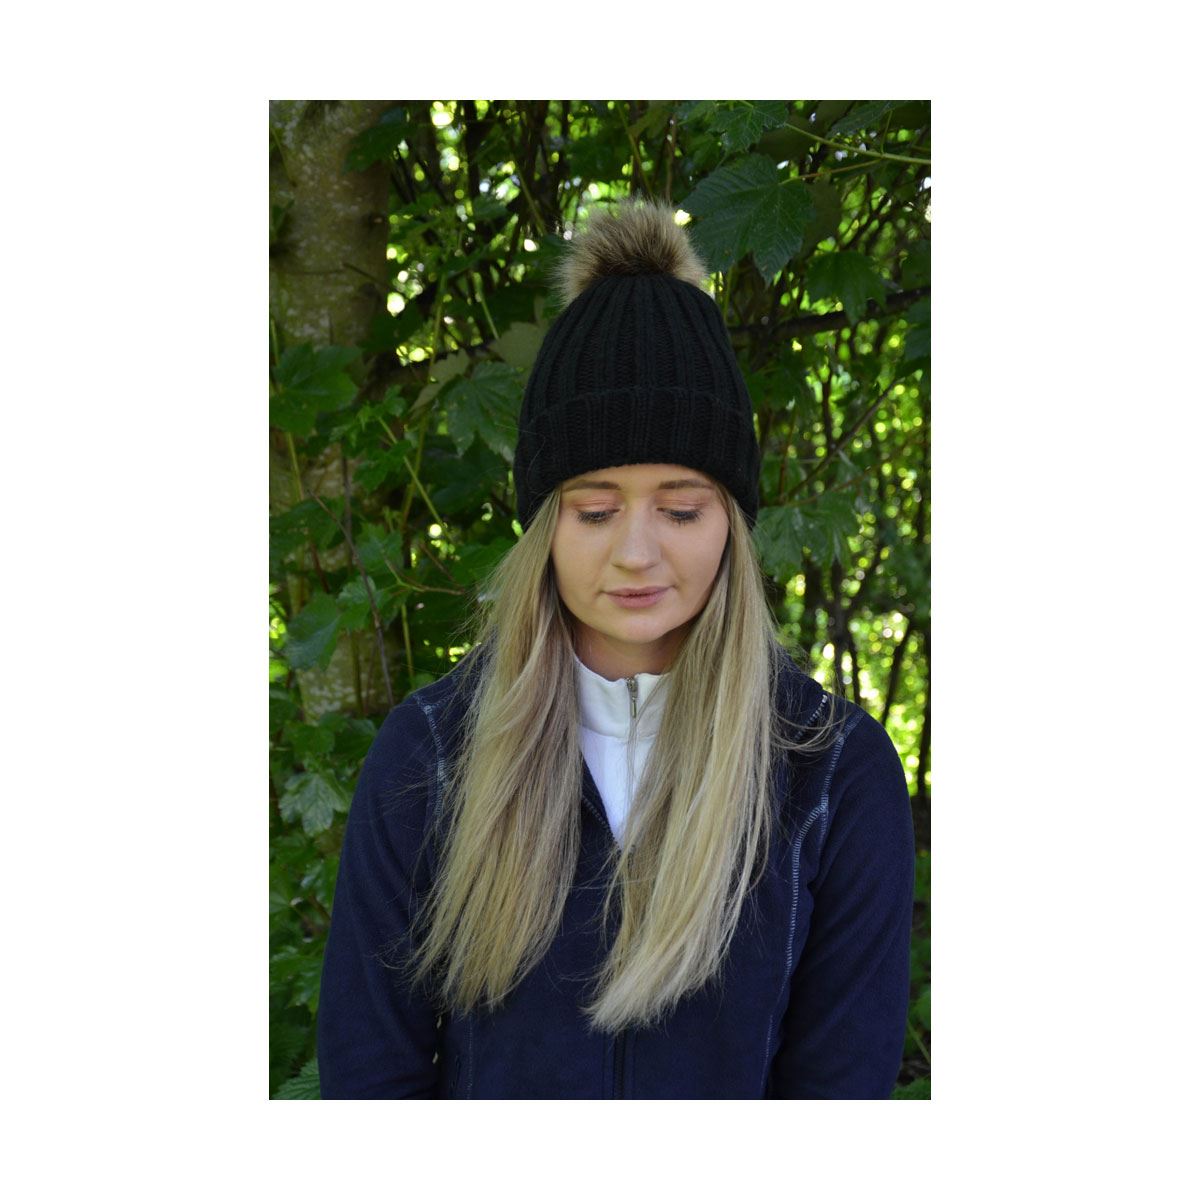 HyFASHION Turin Bobble Hat - Just Horse Riders